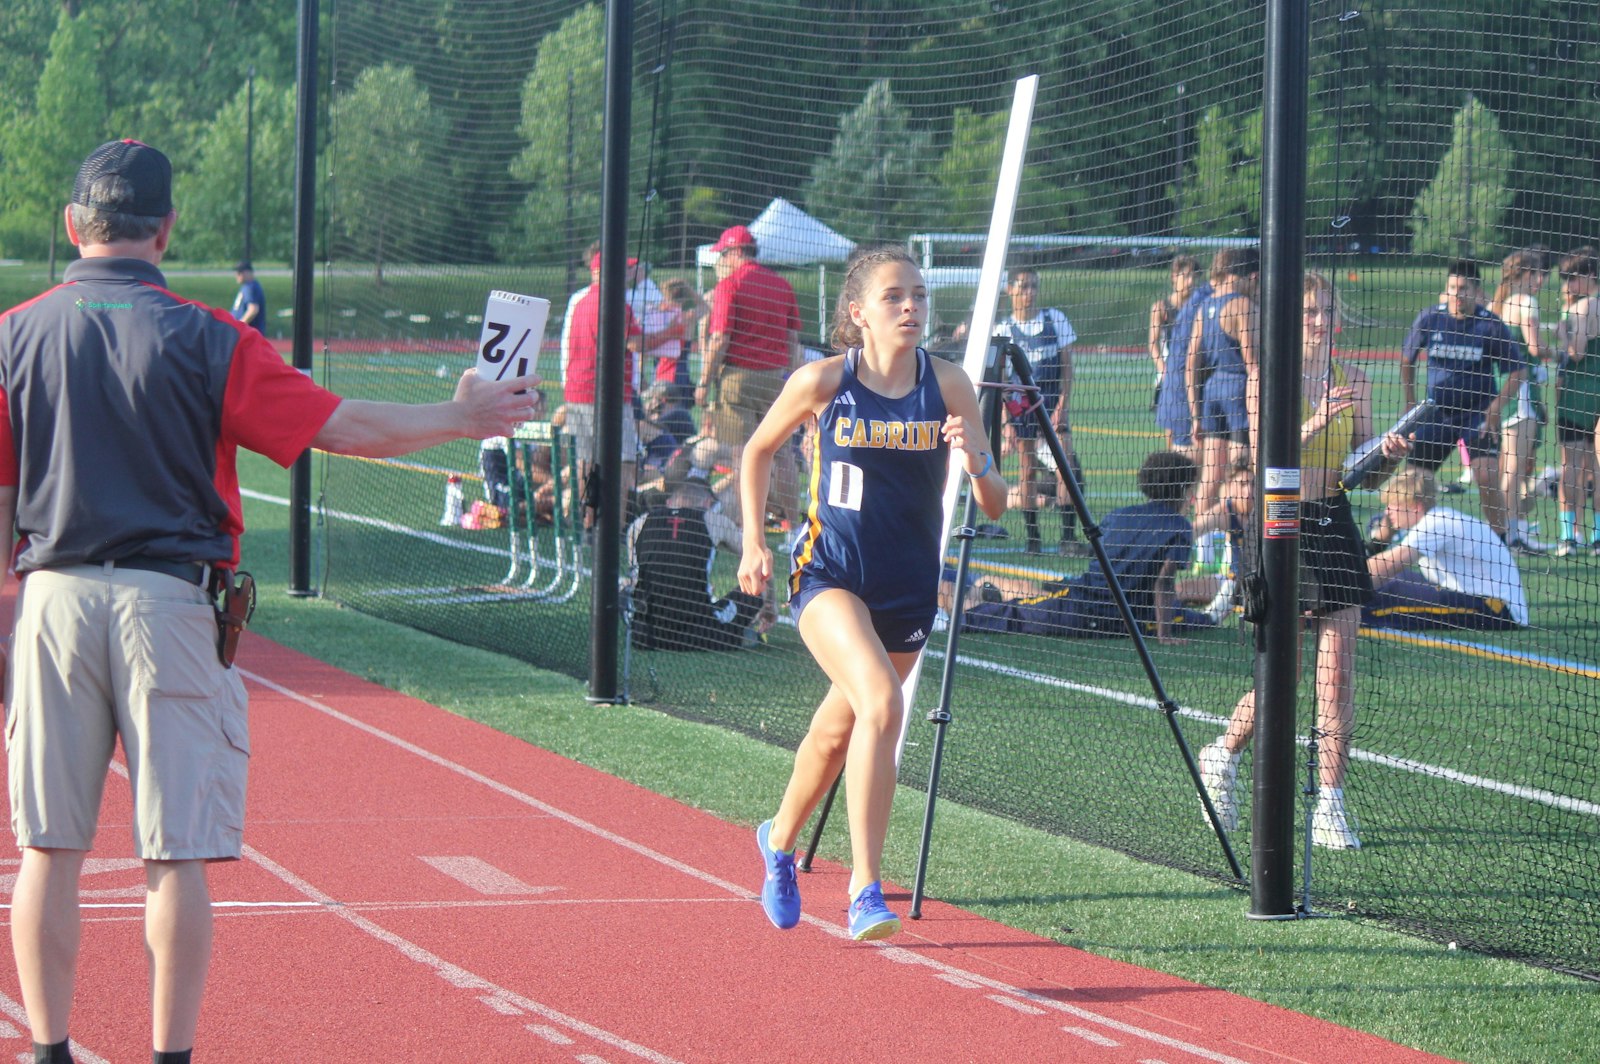 Allen Park Cabrini senior Ava Teed attained all-state status in both the 1600- and 3200-meter runs for the fourth season in a row, finishing third and second in those races, respectively. (Wright Wilson | Special to Detroit Catholic)